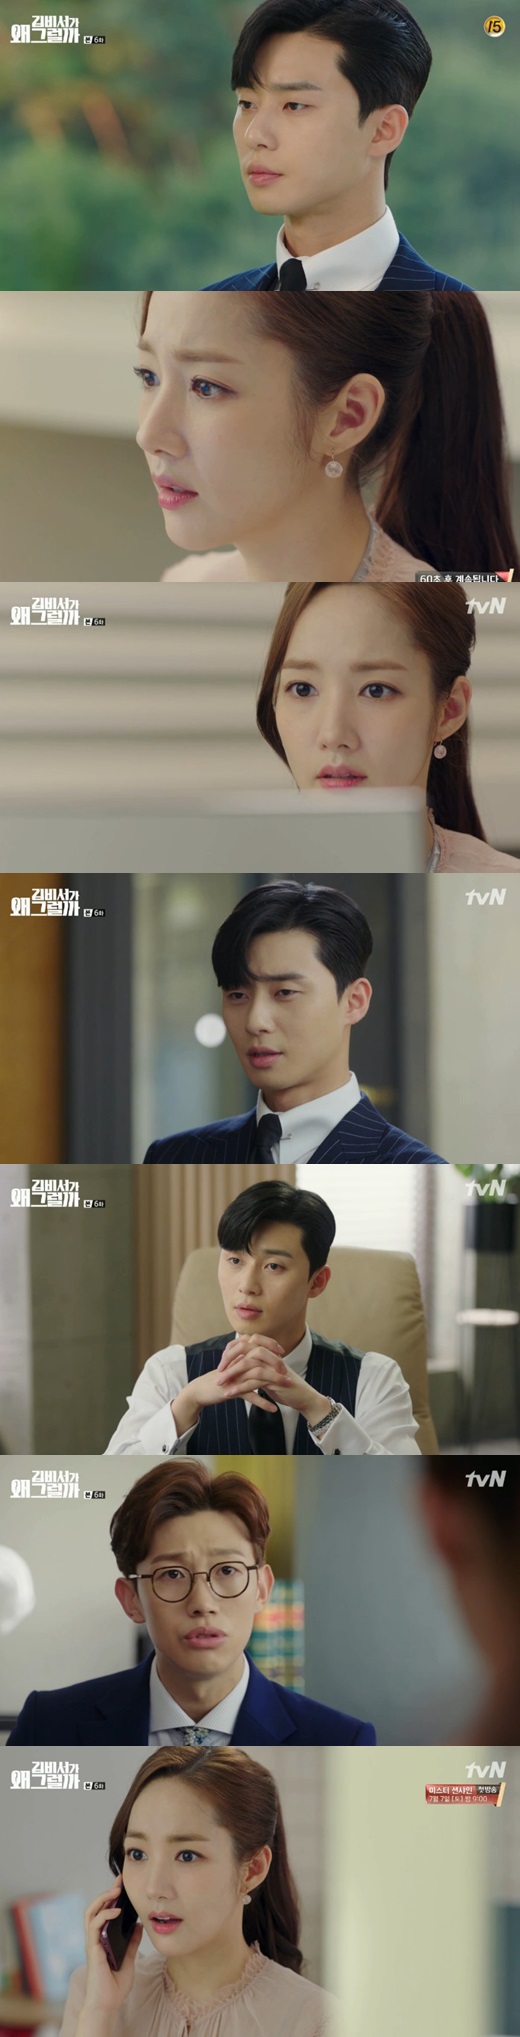 Why is Kim doing it? Park Min-young recalled the memory of the past.In the 6th episode of Why is Secretary Kim doing that (playplayed by Baek Sun-woo, directed by Park Joon-hwa), a cable channel TVN tree drama broadcasted on the 21st night, Lee Young-joon, vice chairman who expresses his mind more actively, and Kim Mi-sung, who is getting into a frenzy, were portrayed.The smile that wrote the monthly car realized that there was no one to do or meet for a long time, and said to myself, Is not it because of the vice chairman? Oh, really vice chairman?Young-joon suddenly appeared in front of the smile, saying, Did you call me?Young-joon said, I thought I was thinking about it now. Well play together today? I used to spend the month.I am going to play with Kim Secretary, he said, and he made a detailed schedule. He suggested a bus travel, saying, I will never do it according to that schedule. Smile said, I was okay though, referring to the difficult house in the past.Young-joon said, Do not forget that the most precious thing in any moment is yourself.Yoo Sik (Kang Ki-young), a famous group president and friend, heard the story of a smile and thought, It has been a long time since I was a close friend to the owner, but Young Jun has never said such a thing.Then, when asked about the question of why he thought it would be Young Jun, he recalled the cable tie and said, Somehow it feels.The smile looked at Young Jun the next day and said, I am so happy to meet you again. Young Jun said, I am too.In addition, Young Jun found the place again to draw the doll that he wanted to do the night before, and he showed his concentration and picked up the puppy doll.Young-joon said, This dolls name is Memory Haga, and the smile recalls the past and responds, I will remember. Young-joon said, Is it touching enough to moisten your eyes?I wondered.Smile was told that Morpheus had been abducted in the past and restructured Memory.Then, he found out that he was Lee Tae-hwan, not Young-joon, saying, Yes, it was Lee Sung-yeon.At the end of the broadcast, however, there appeared a scene that seemed to suggest that the child who had been abducted in the past was Young Jun, not Sung Yeon. Young Jun said, Do you want to know why I hired Kim?It was Kim Mi-so, he said, expressing the nuance that he knew the smile in the past.